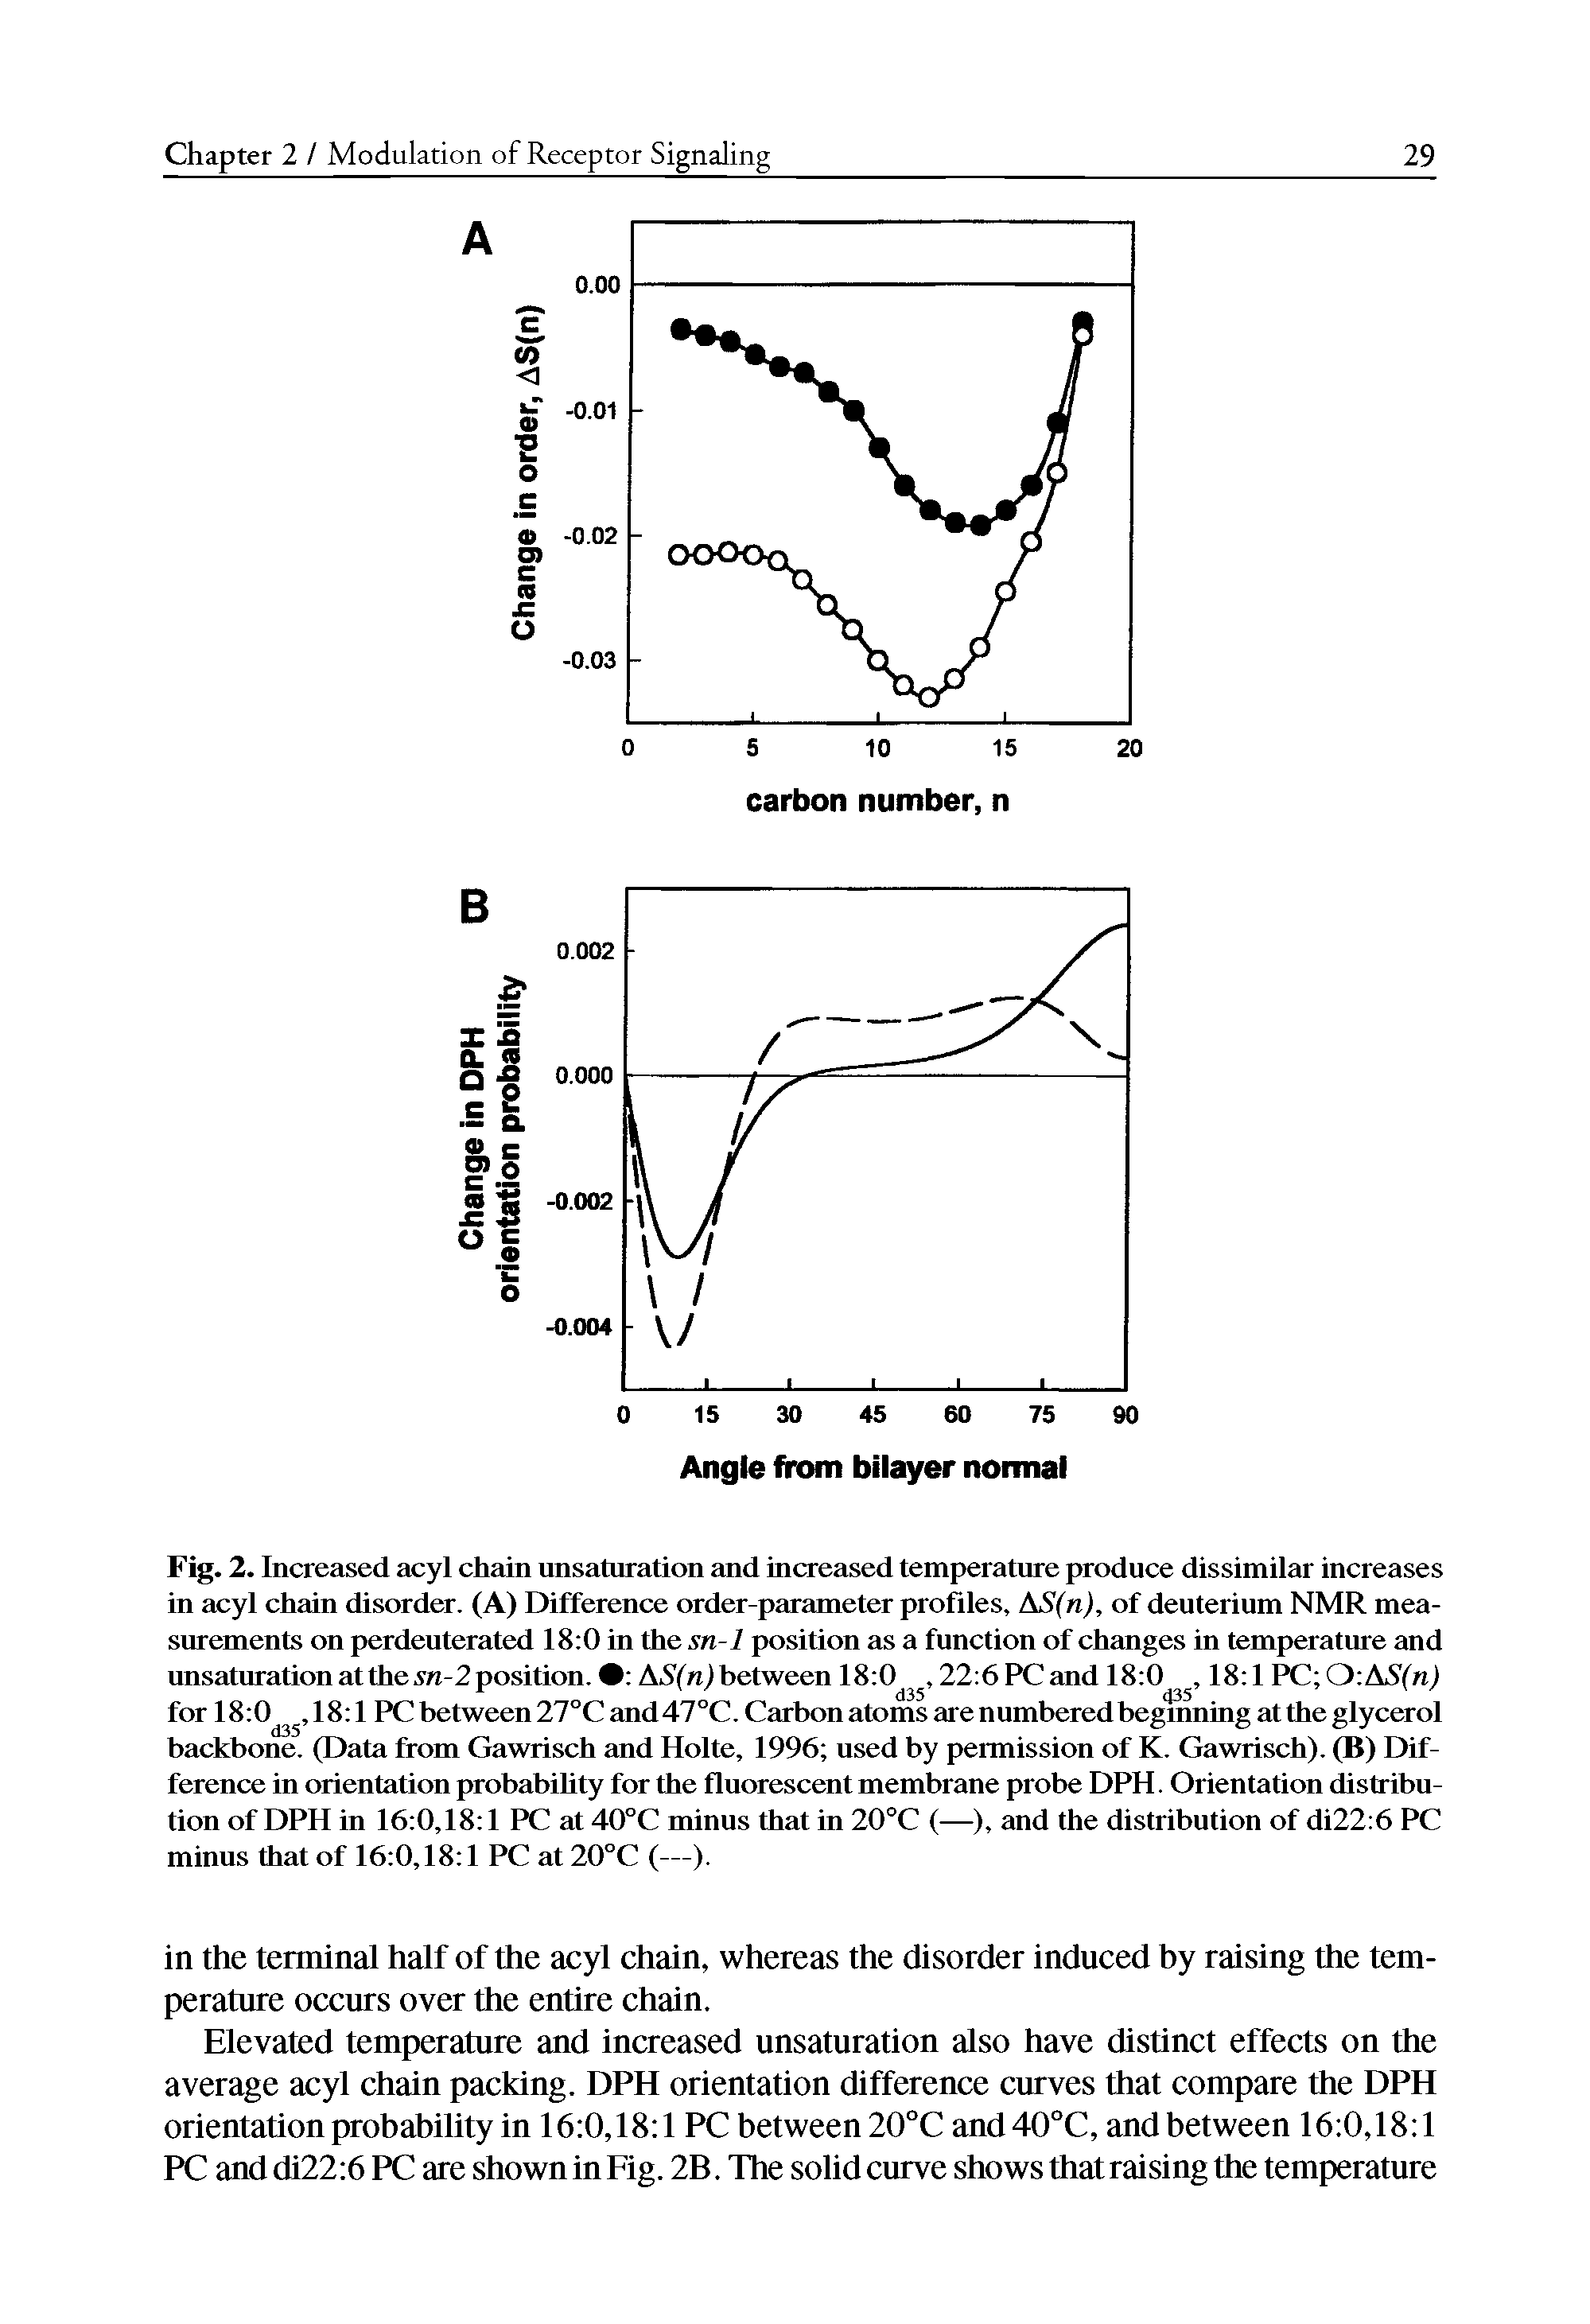 Fig. 2. Increased acyl chain unsaturation and increased temperature produce dissimilar increases in acyl chain disorder. (A) Difference order-parameter profiles, S(n), of deuterium NMR measurements on perdeuterated 18 0 in the sn-1 position as a function of changes in temperature and unsaturation at the 5n-2 position. A,SYm) between 18 0, 22 6 PC and 18 0, 18 1 PC O A5fn) for 18 0, 18 1 PC between 27°C and47°C. Carbon atoms are numbered beginning at the glycerol backbone. (Data from Gawrisch and Holte, 1996 used by permission of K. Gawrisch). (B) Difference in orientation probability for the fluorescent membrane probe DPH. Orientation distribution of DPH in 16 0,18 1 PC at 40°C minus that in 20°C (—), and the distribution of di22 6 PC minus that of 16 0,18 1 PC at 20°C (—).